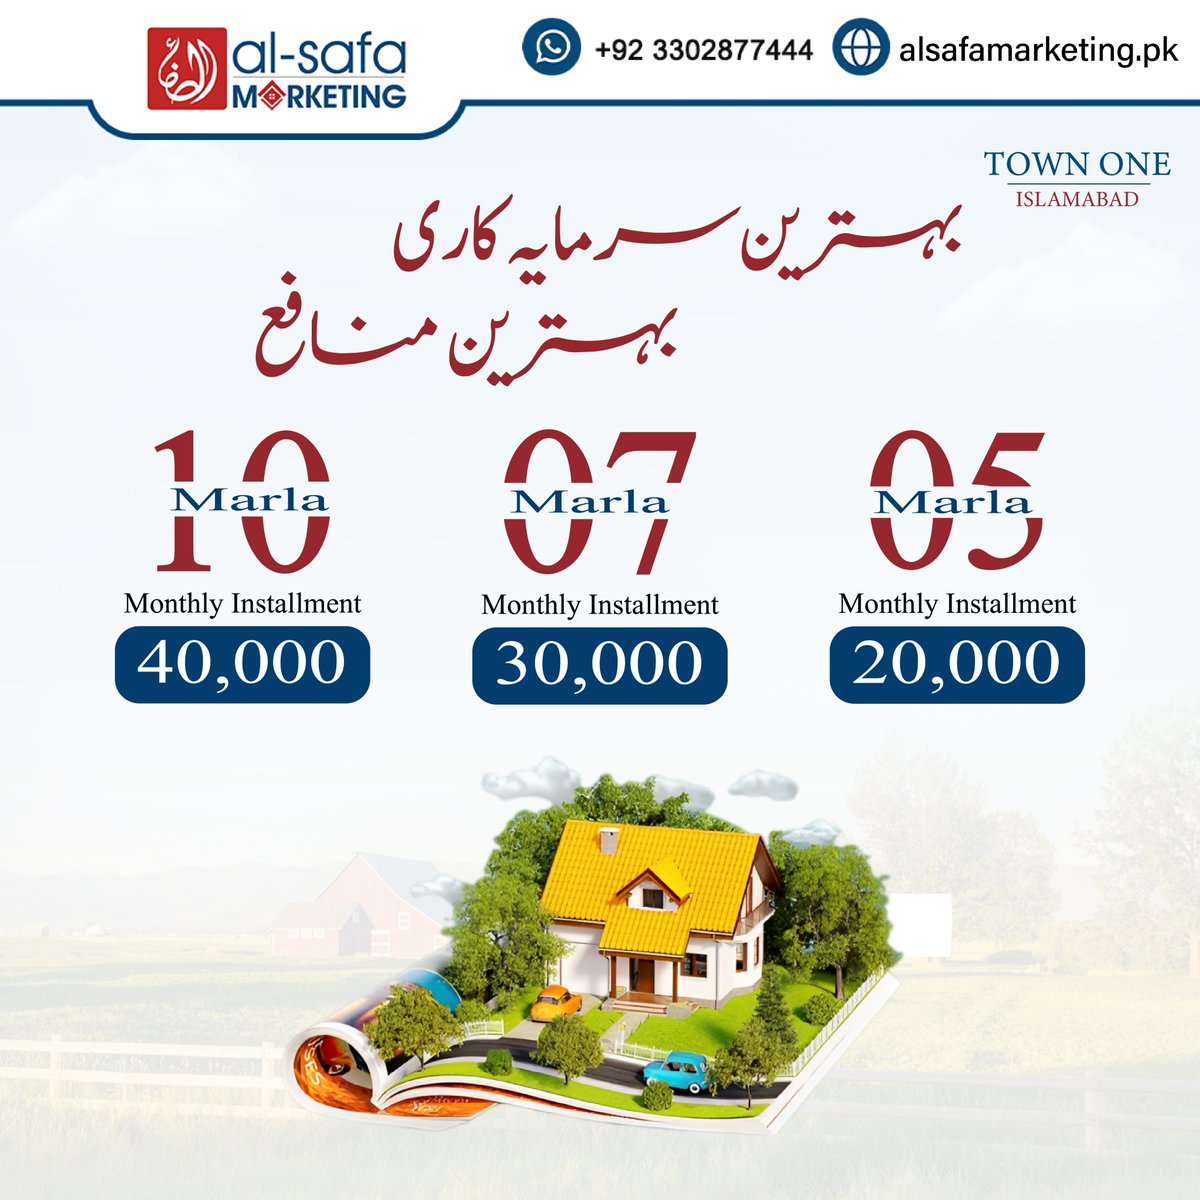 Secure your piece of paradise in Town One Islamabad with easy monthly installments – Book your 5, 7, or 10 Marla plot now for a blissful future!

#alSafa #alsafamarketing #townone #islamabad #easyinstallments #InvestSmart #TownOneIslamabad